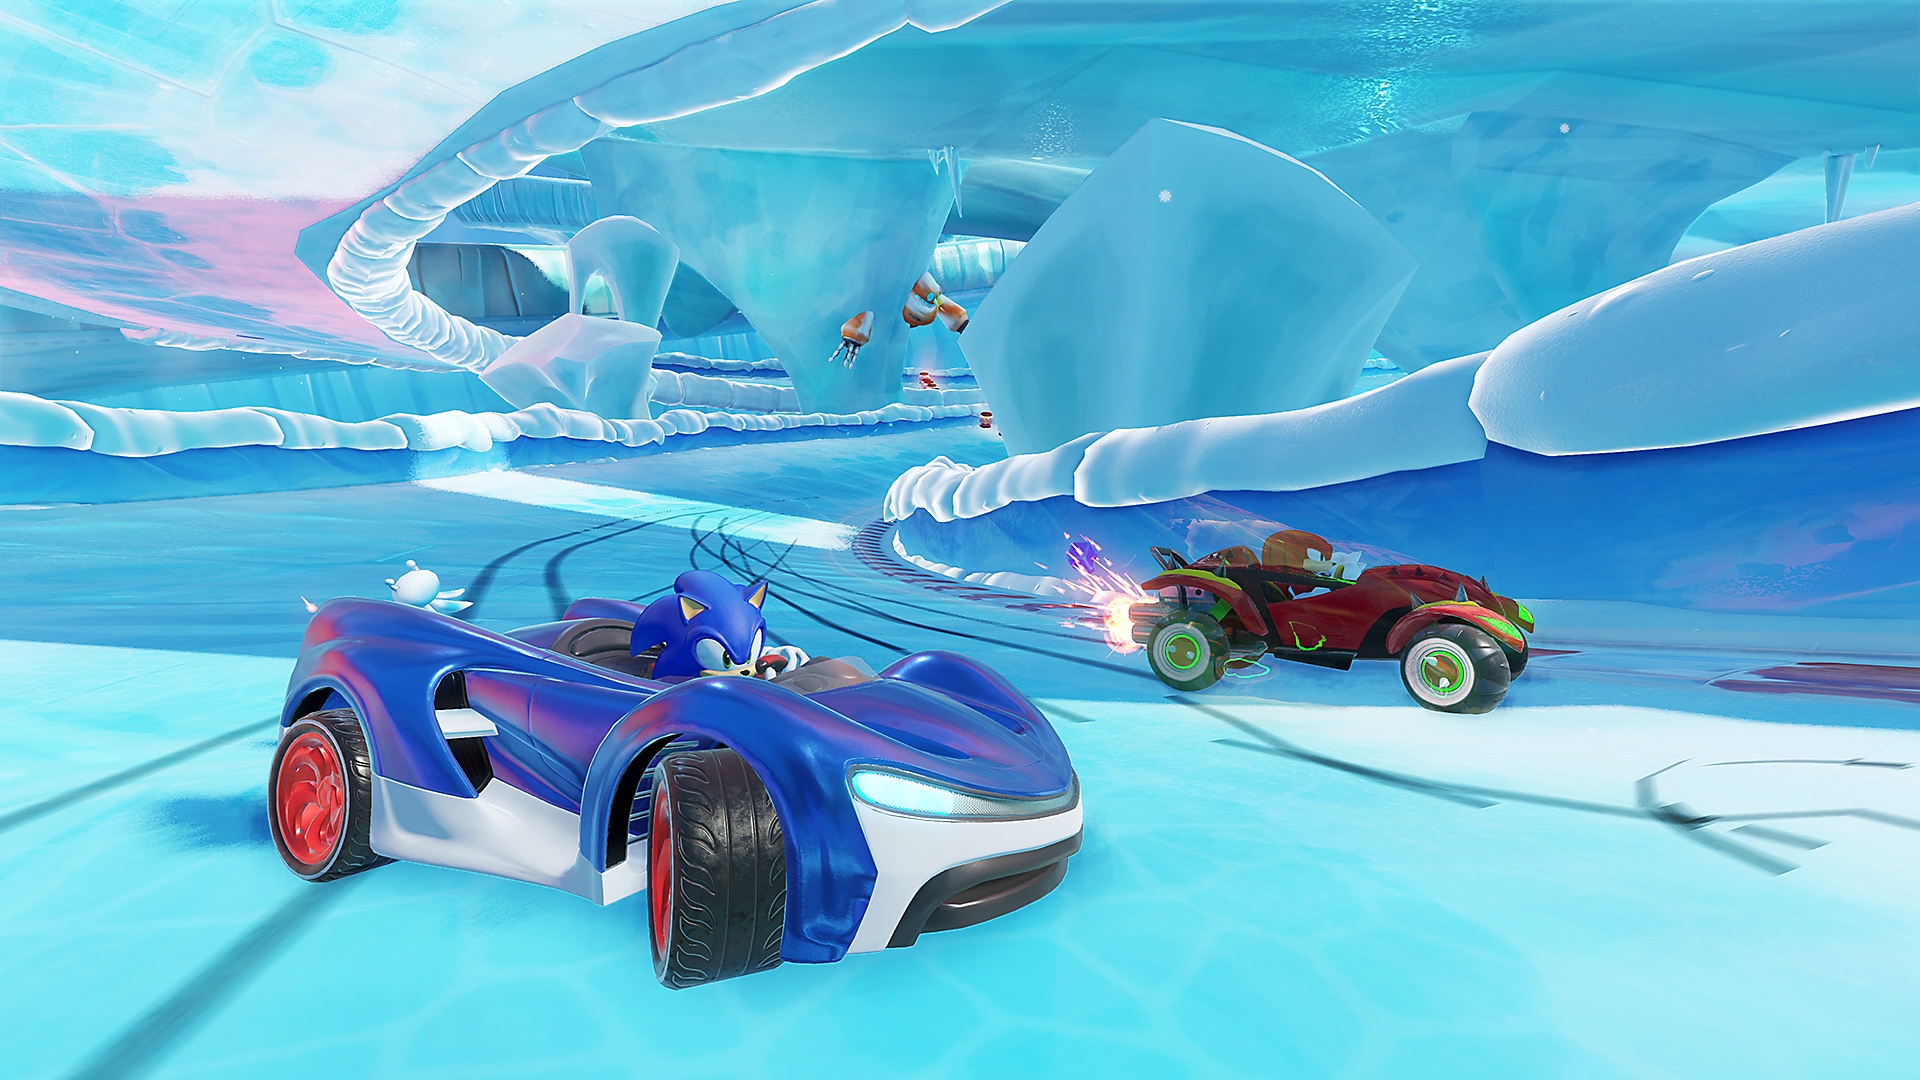 Team Sonic Racing screenshot showing Sonic racing in a blue sports car on an icy circuit